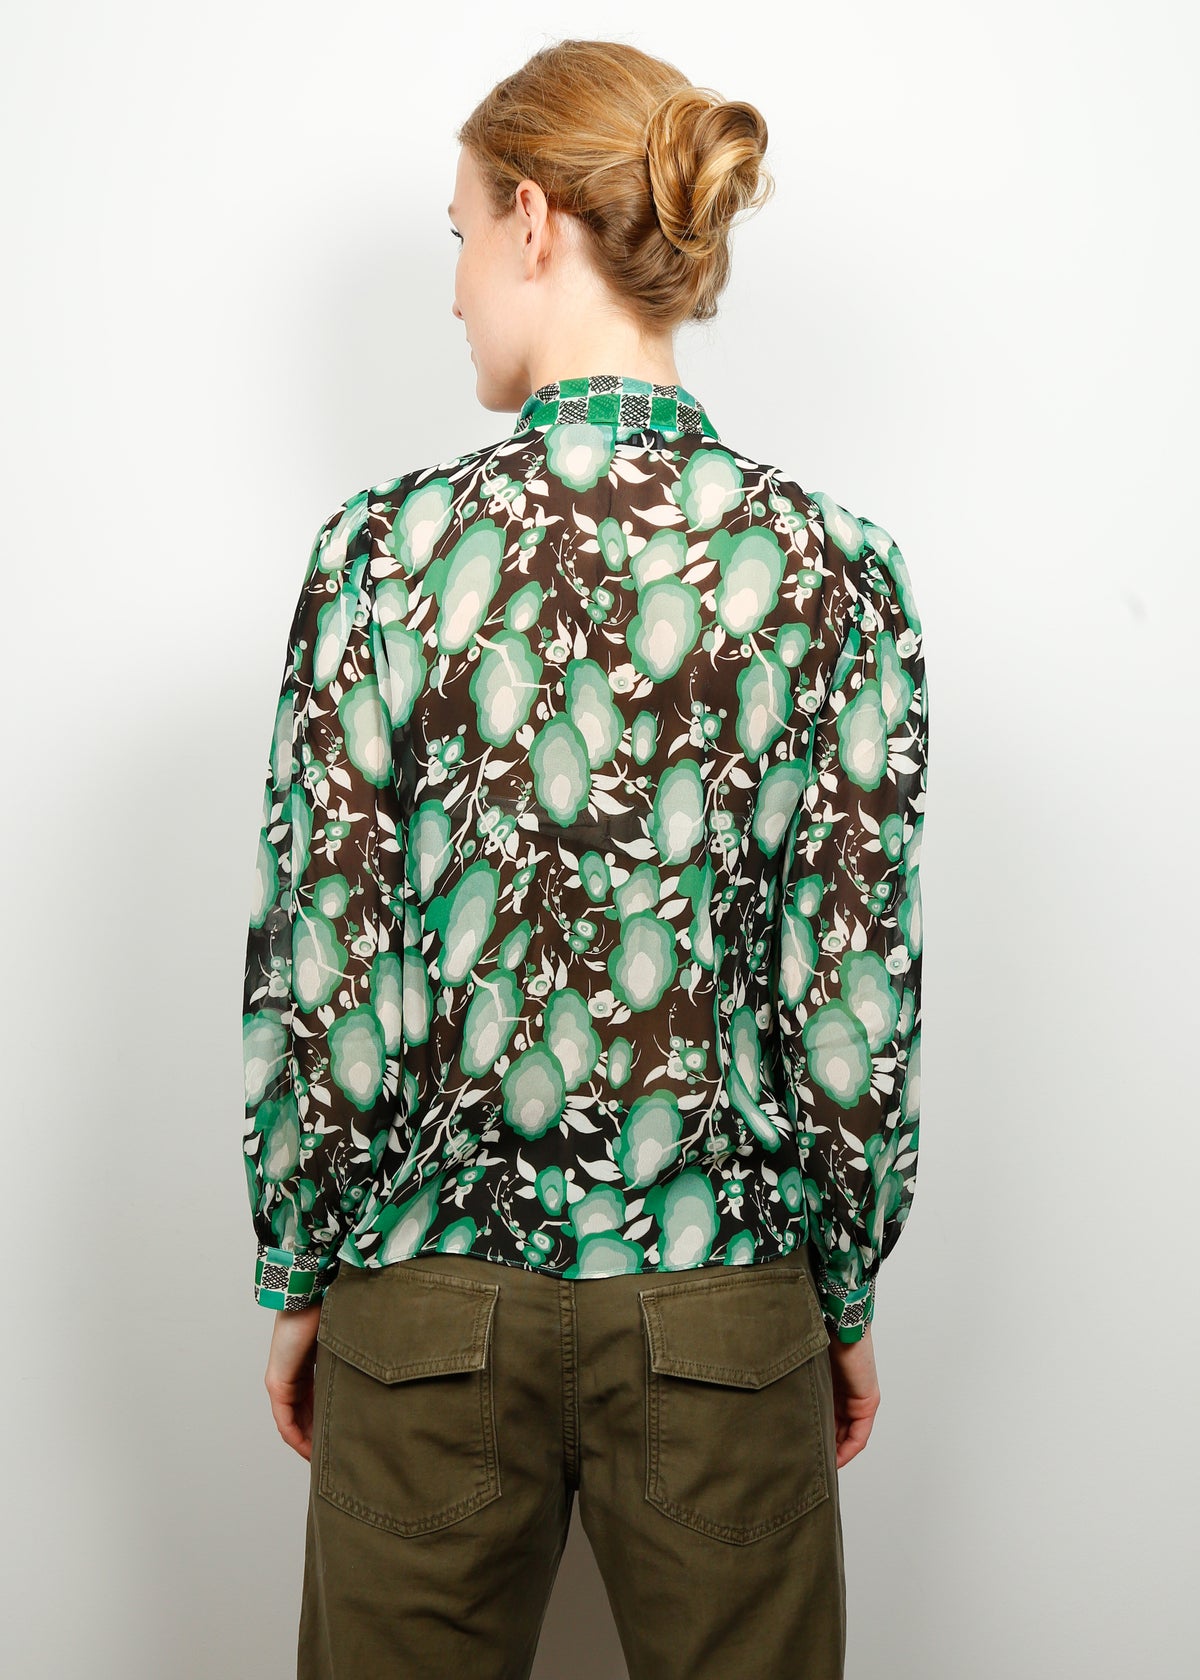 RIXO Thompson Blouse in Green Starlet Floral